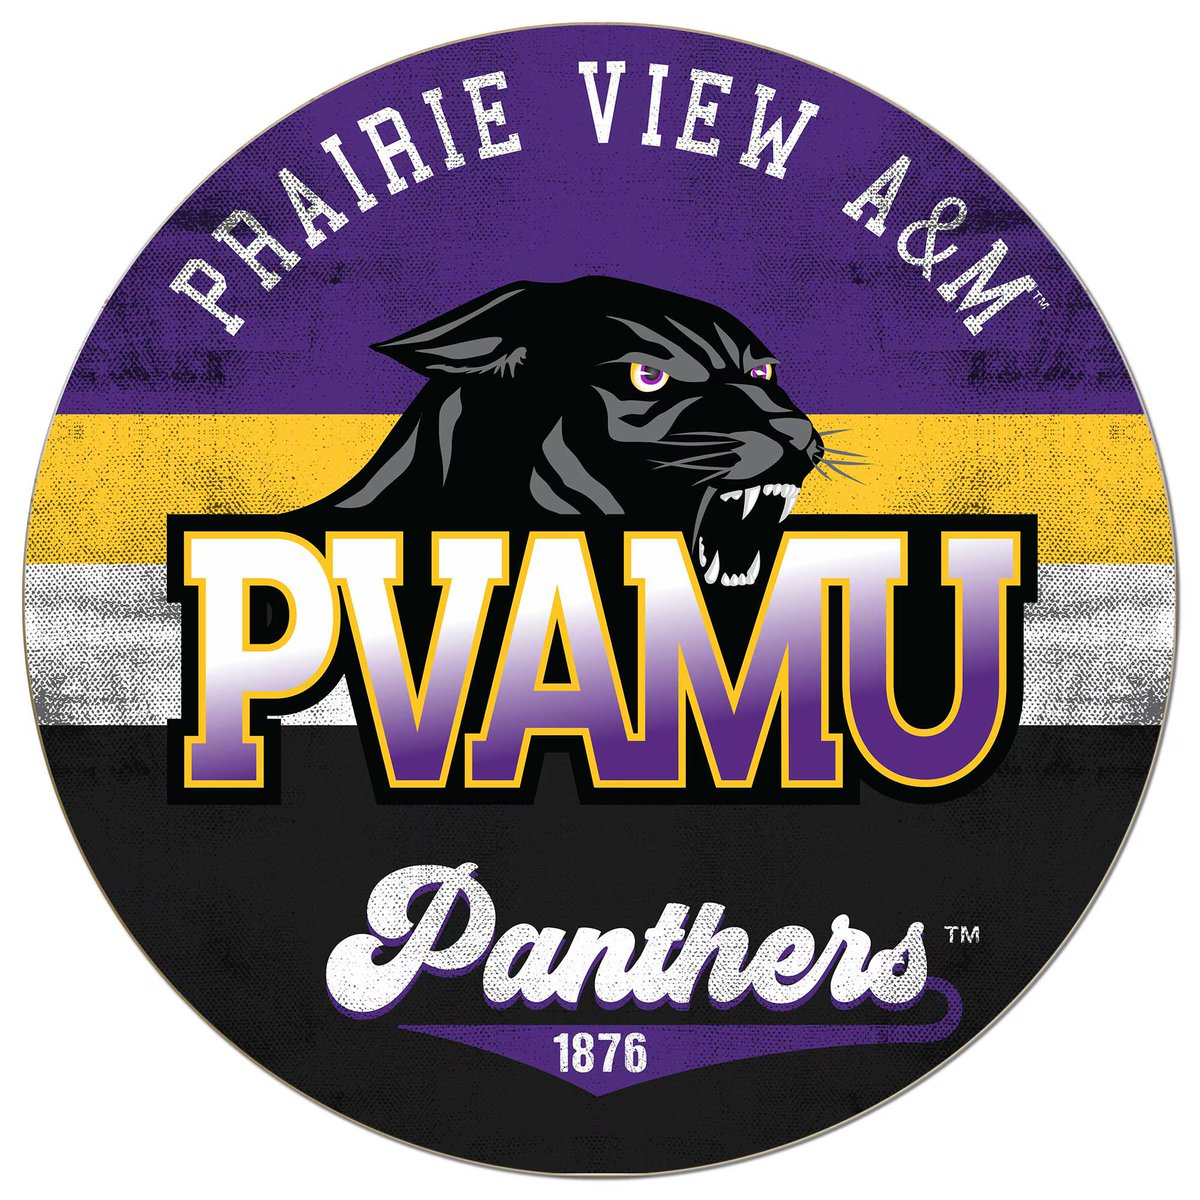 You’re doing good things when @mooreathletics from Prairie View A&M University (@PVAMU_Football) stops by. Always welcome here @WestburyFB‼️
Who’s next…?🔦
#StarSearch⭐️
#NewWave🌊
#ManTheShip🚢
#AnchorDown⚓️
#RecruitBigBury🔵⚪️📈